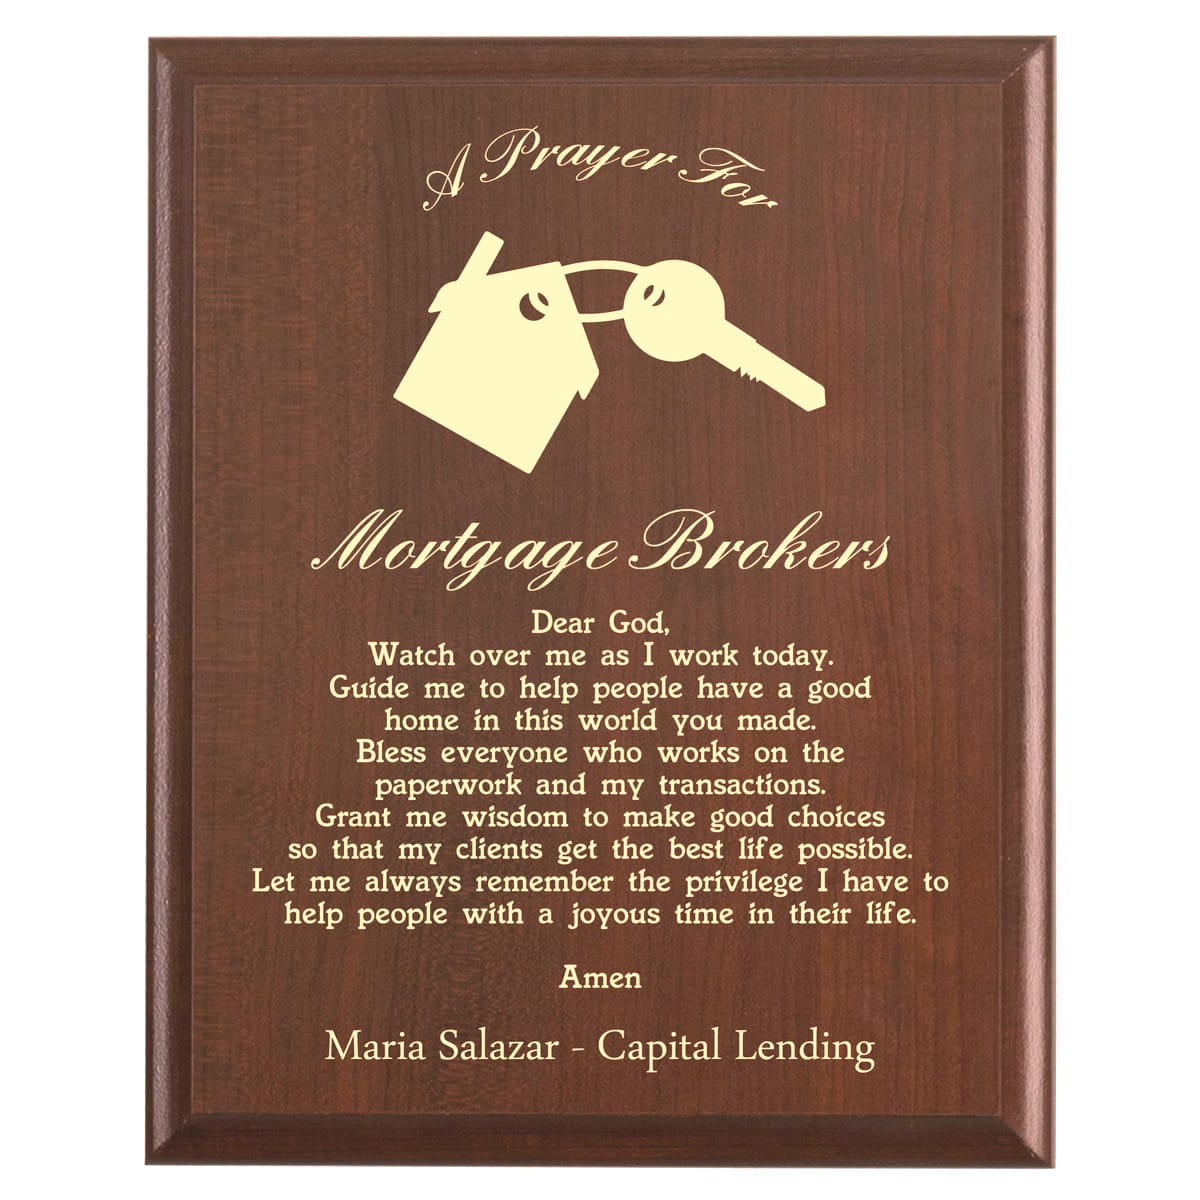 Plaque photo: Mortgage Broker Prayer Plaque design with free personalization. Wood style finish with customized text.